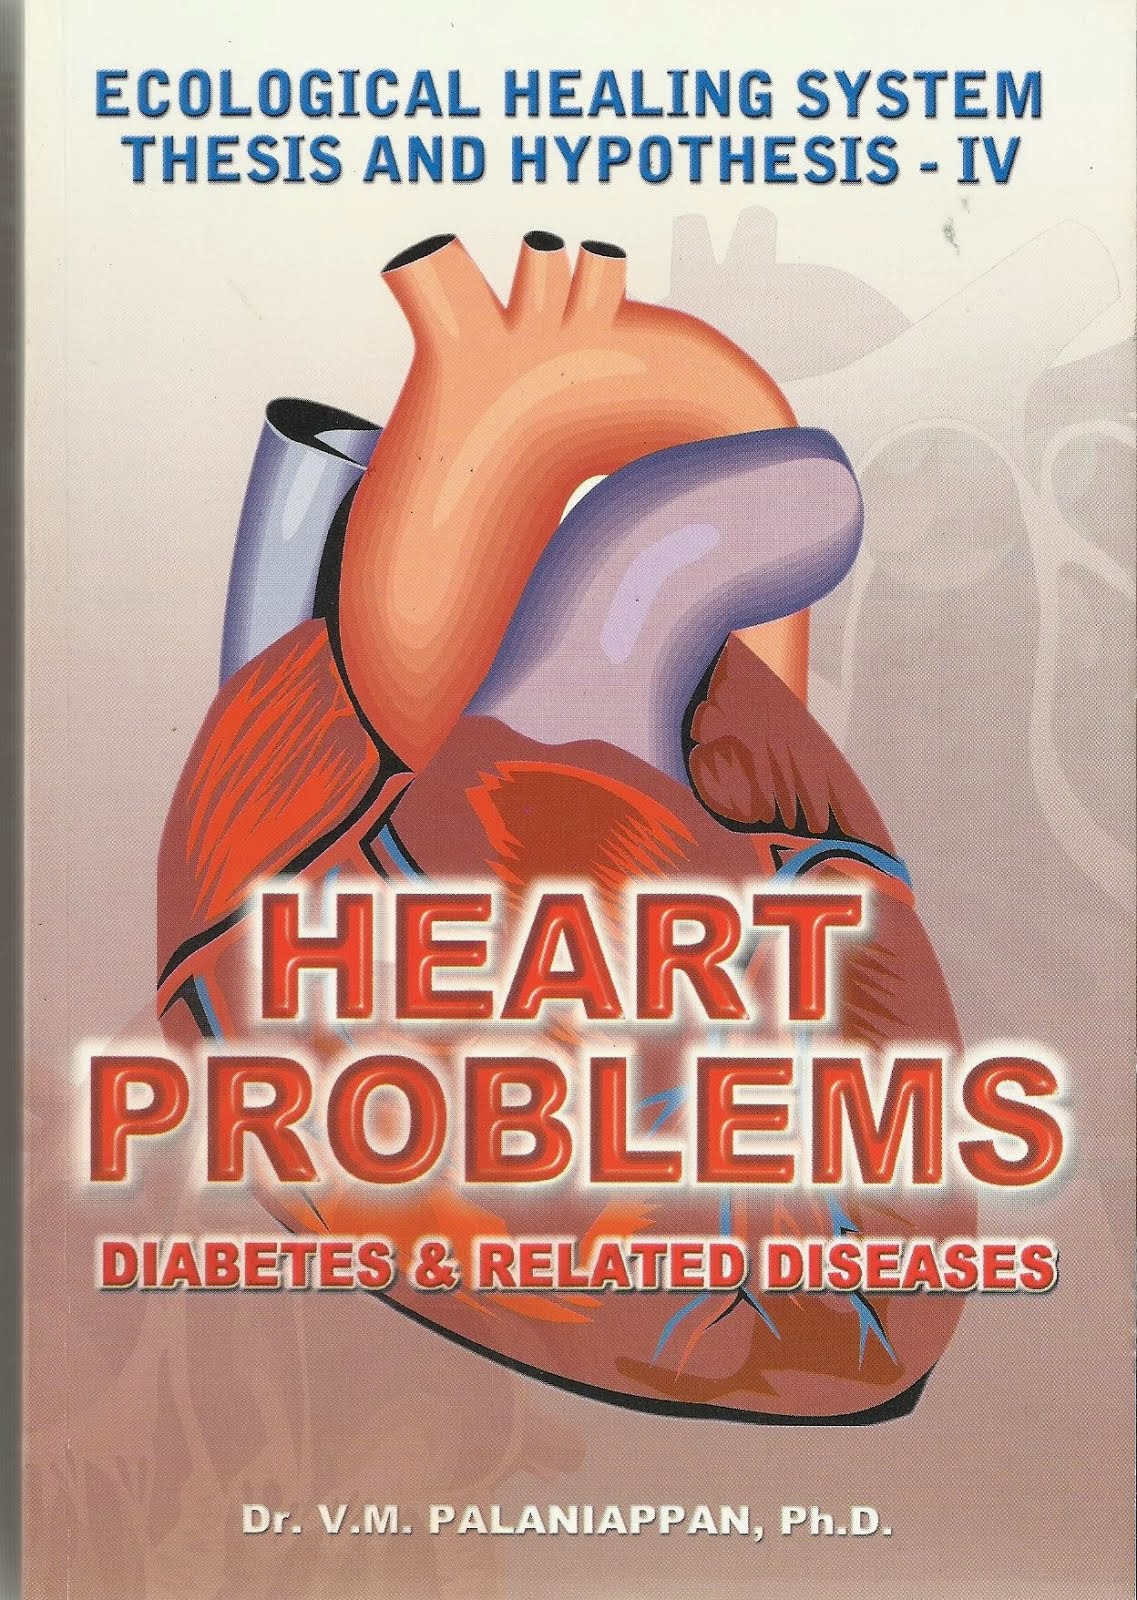 HEART PROBLEMS, DIABETES, AND RELATED DISEASES